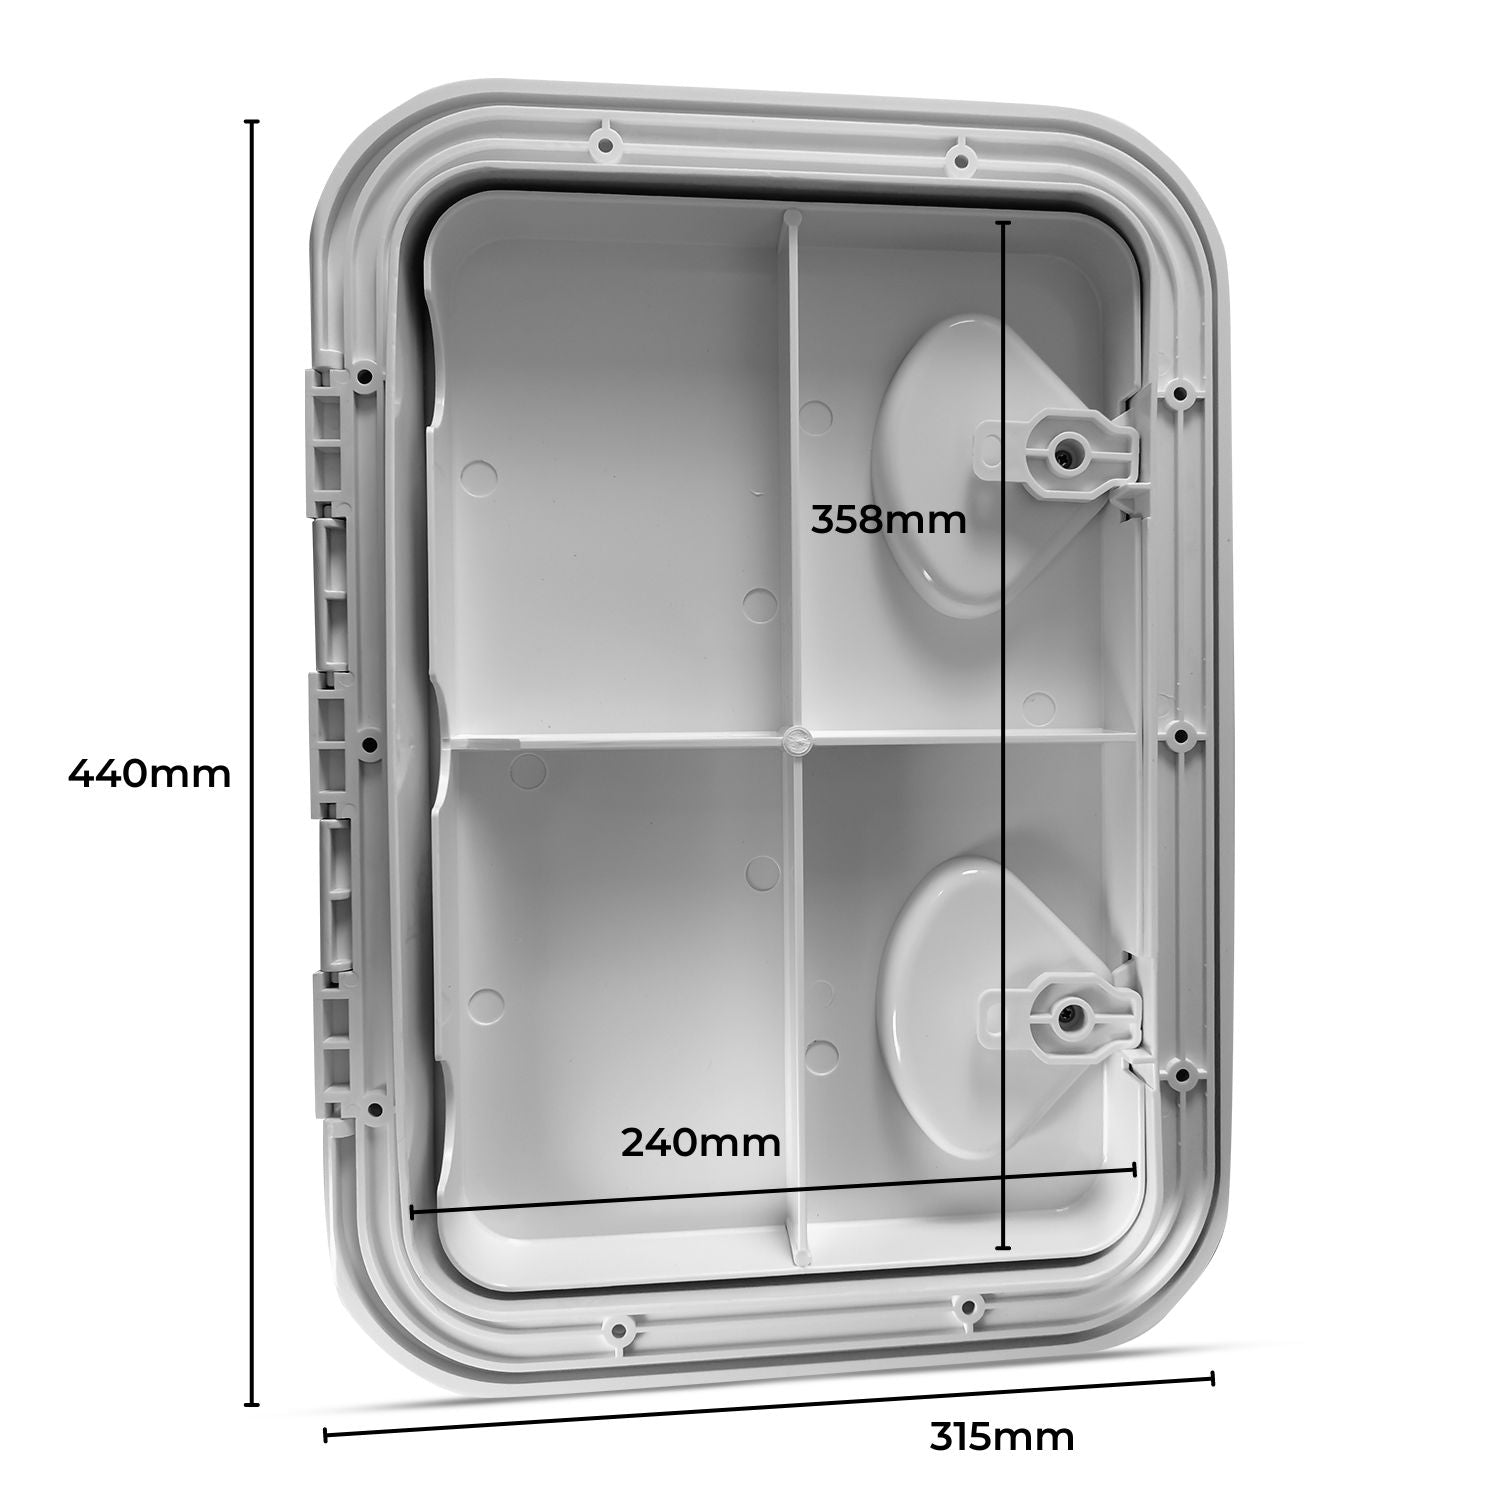 RYNOMATE Storage Hatch Box with Ultra-Lock Double Door Security System (440x318mm)